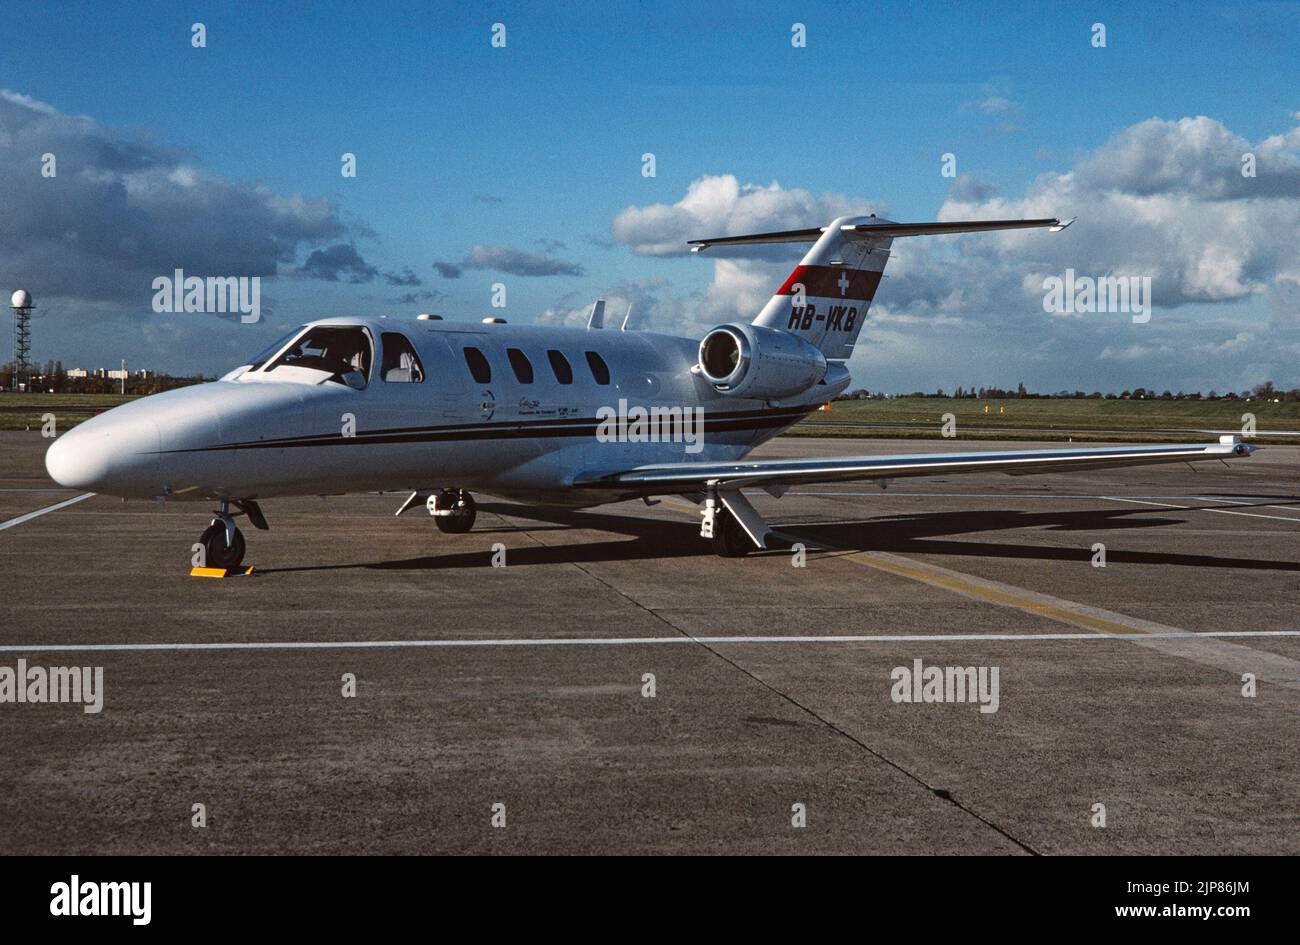 A Cessna 525 CitationJet Business, executive, corporate, private Jet, registered in Switzerland as HB-VKB. Stock Photo